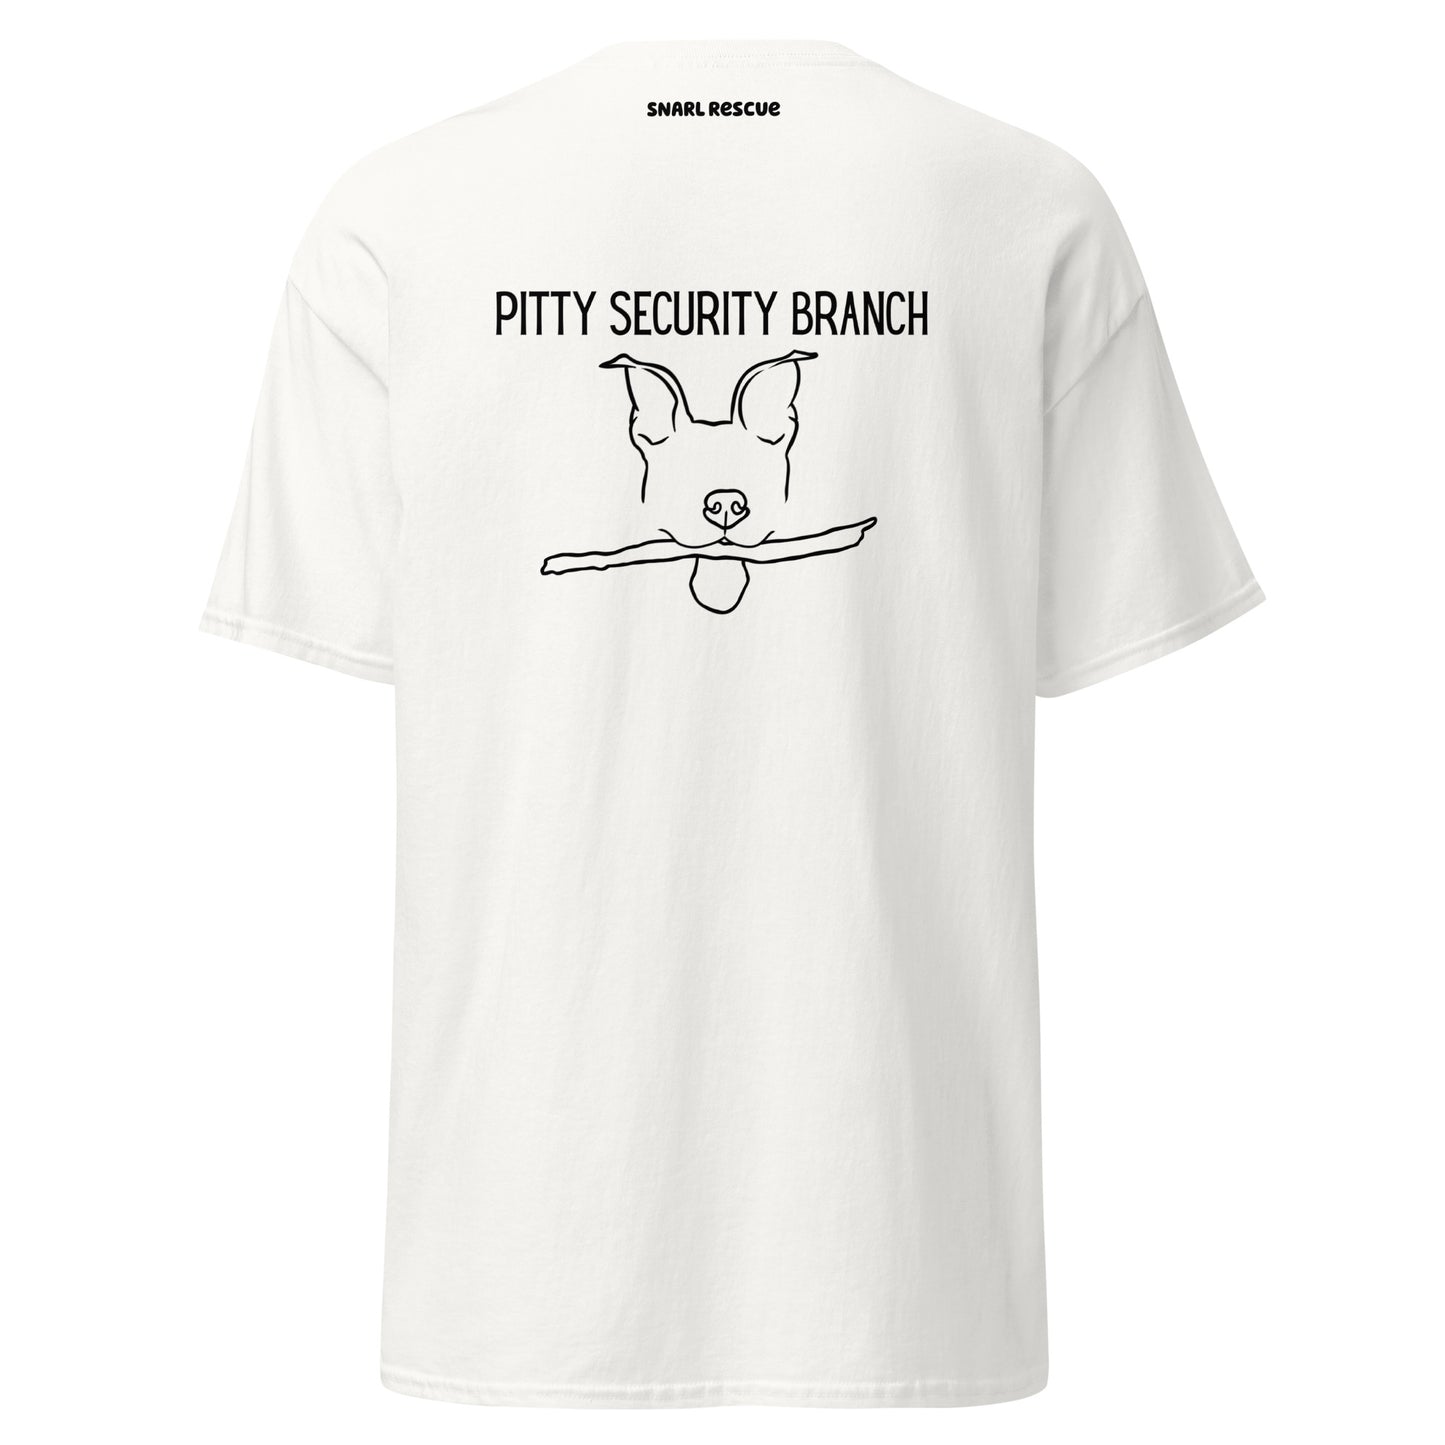 The Pitty Security Branch Tee